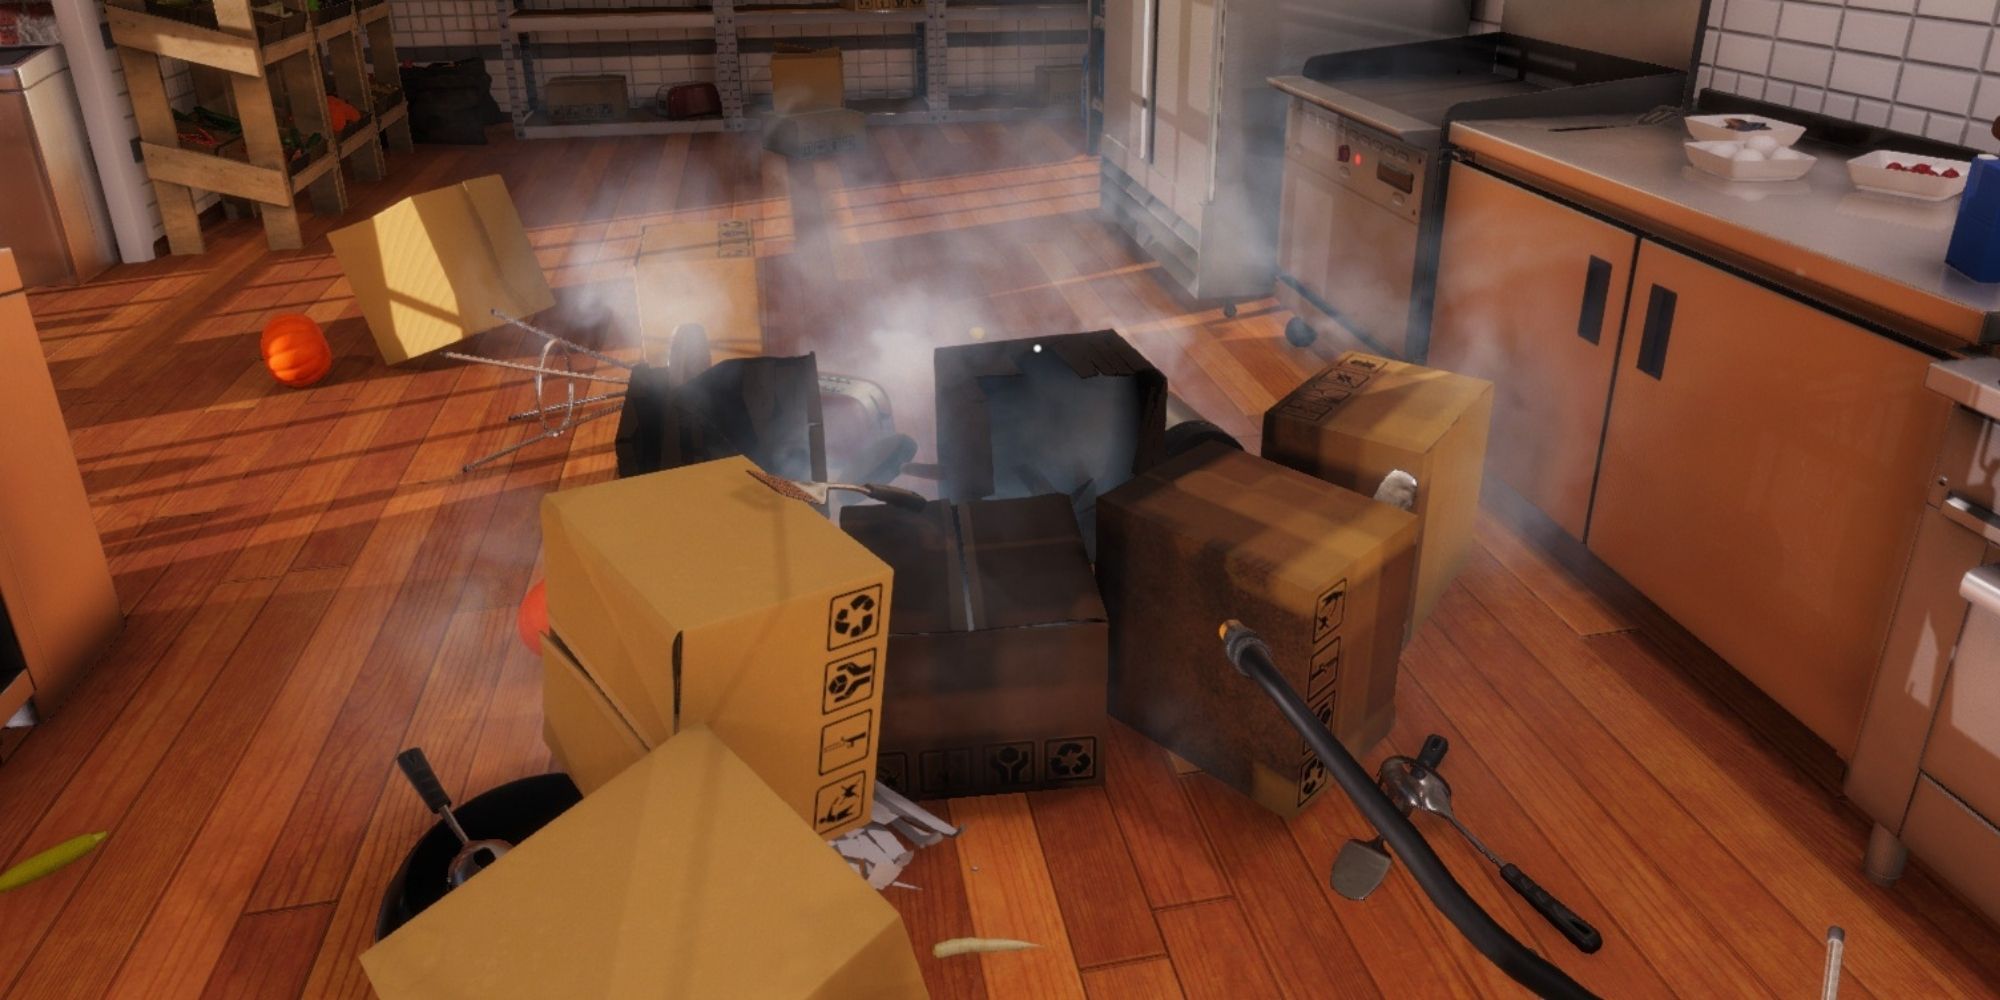 Kitchen Fire Contained before it spreads in Cooking Simulator